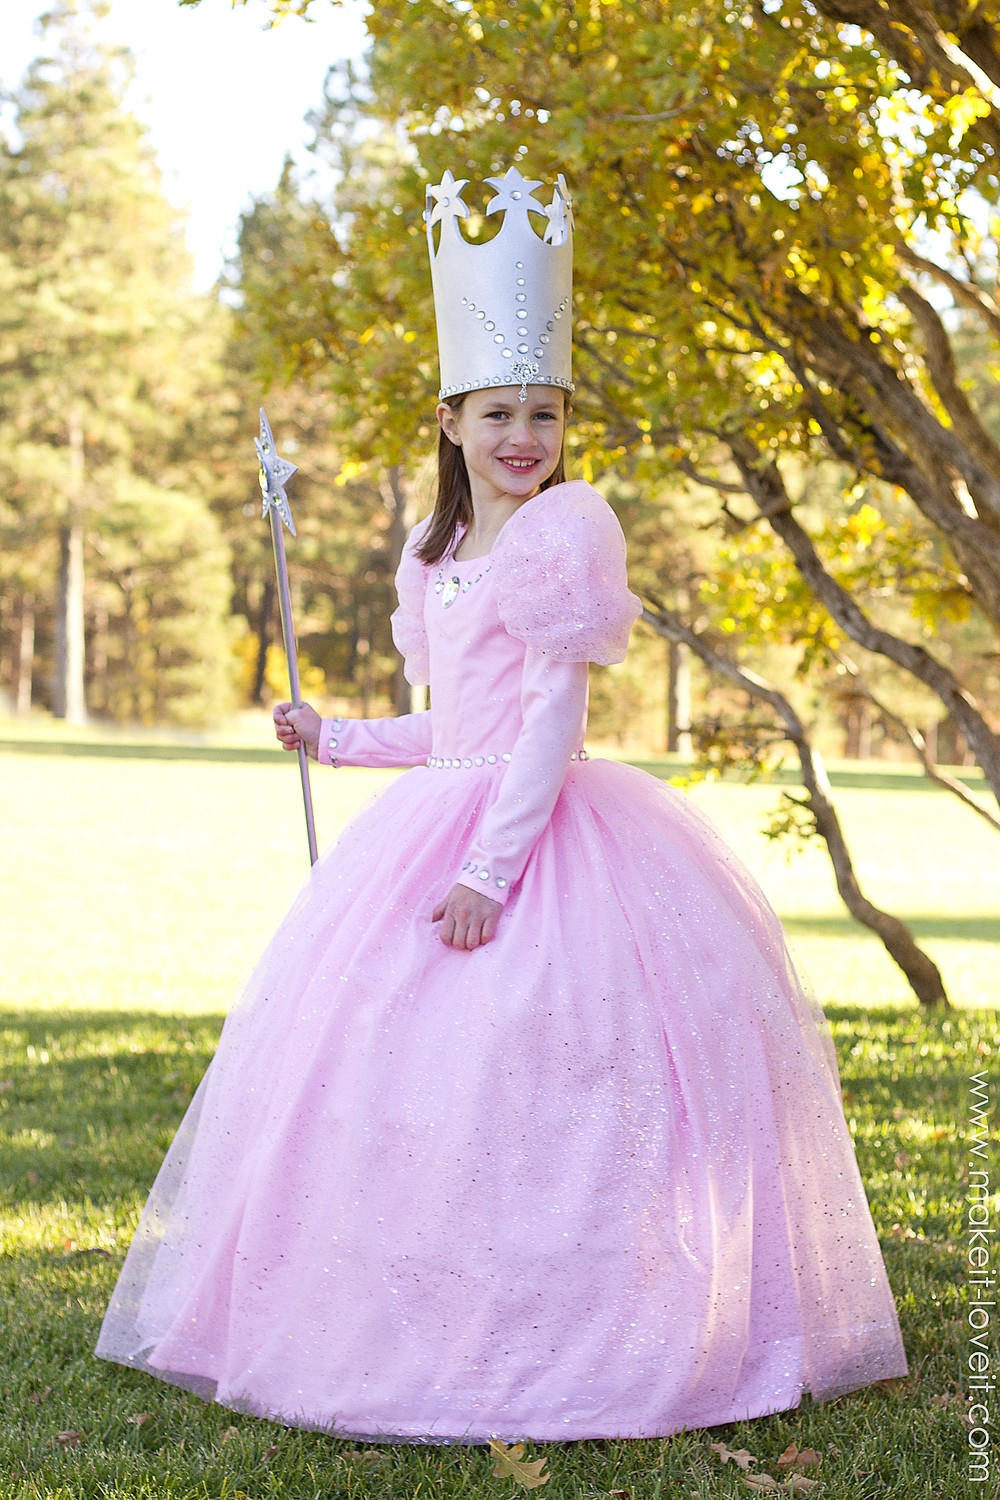 Glinda The Good Witch Costume DIY
 Are You A Good An Evil Witch ProProfs Quiz